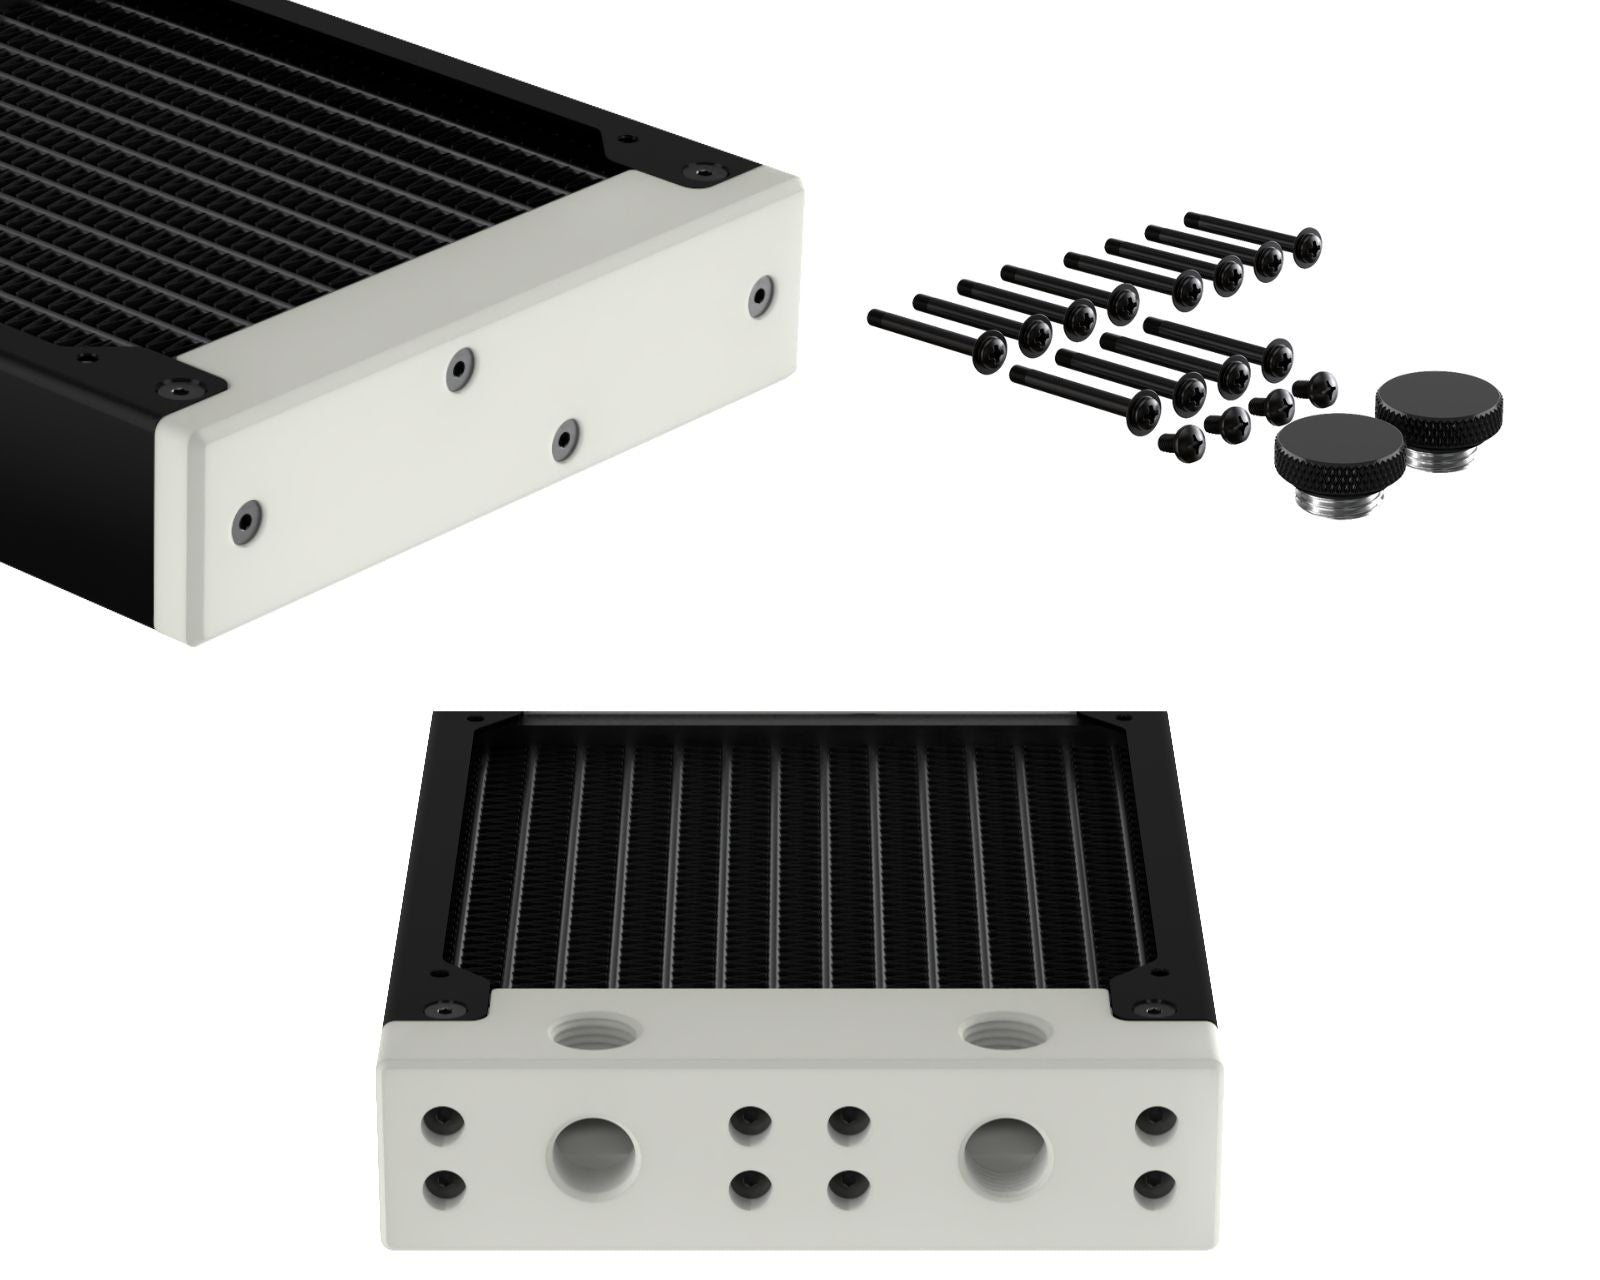 PrimoChill 360SL (30mm) EXIMO Modular Radiator, White POM, 3x120mm, Triple Fan (R-SL-W36) Available in 20+ Colors, Assembled in USA and Custom Watercooling Loop Ready - Satin Black